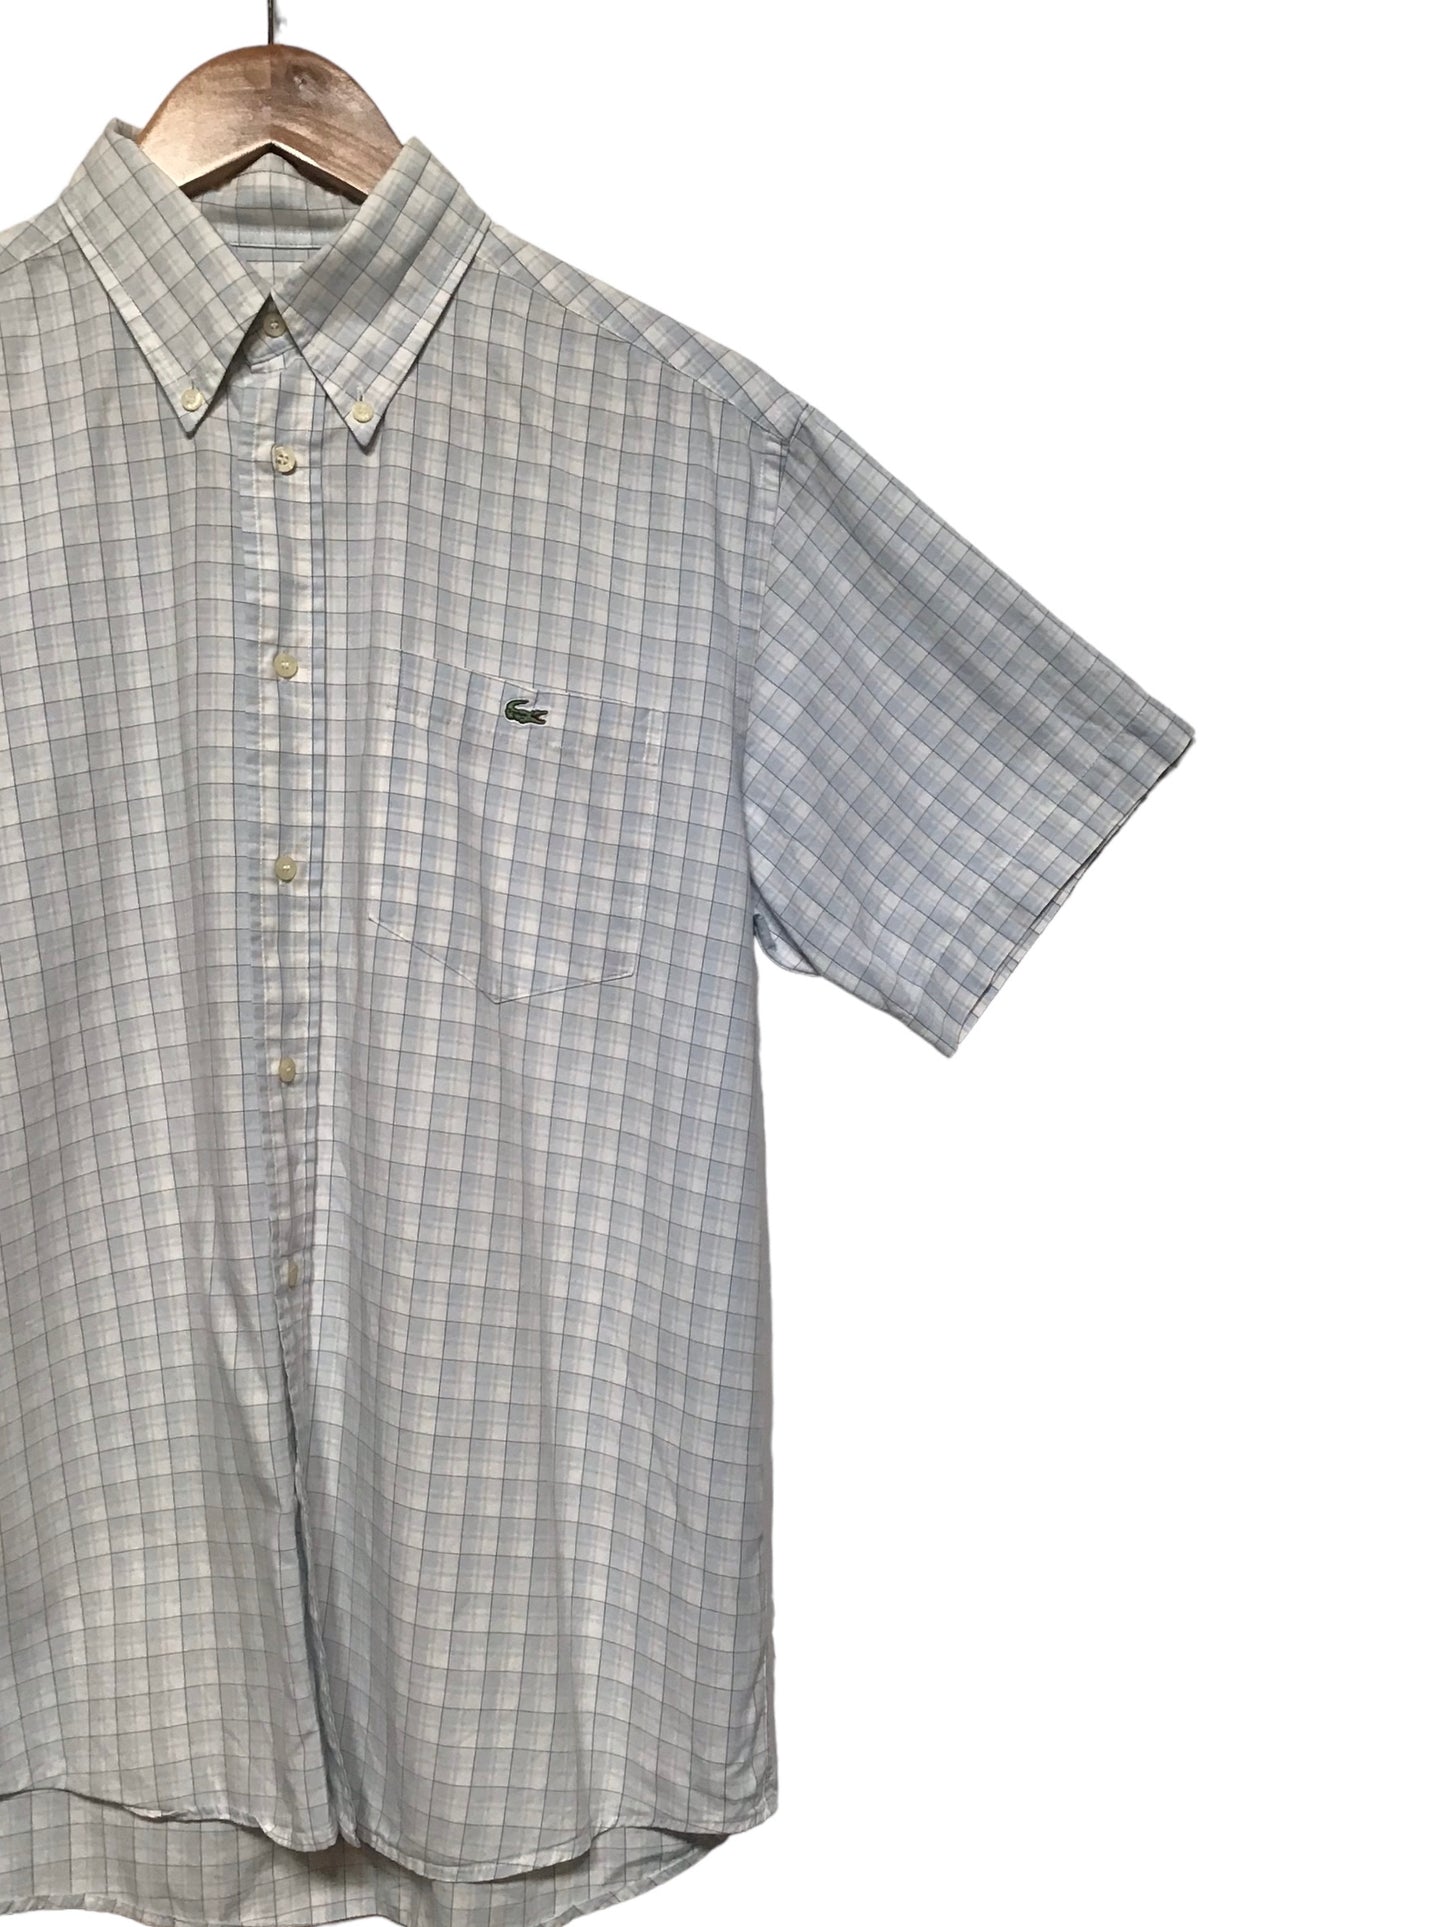 Lacoste Blue Chequered Shirt (Size L)